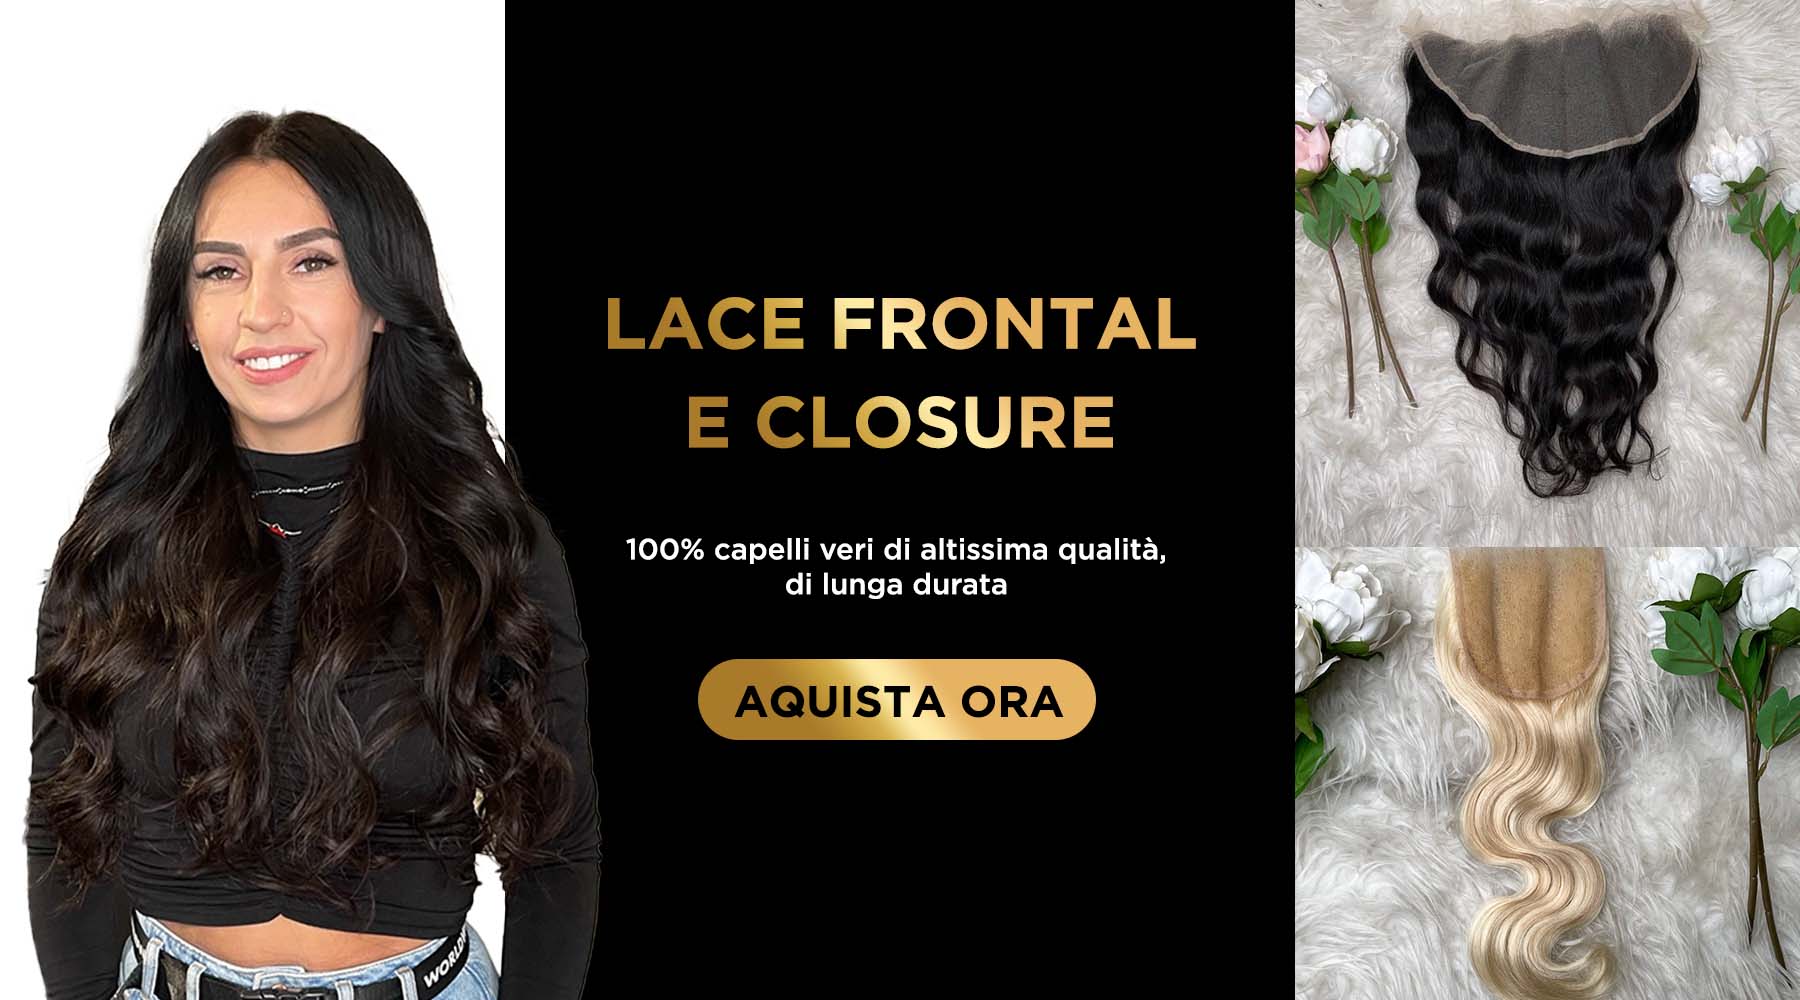 Lace Forntal & Closure